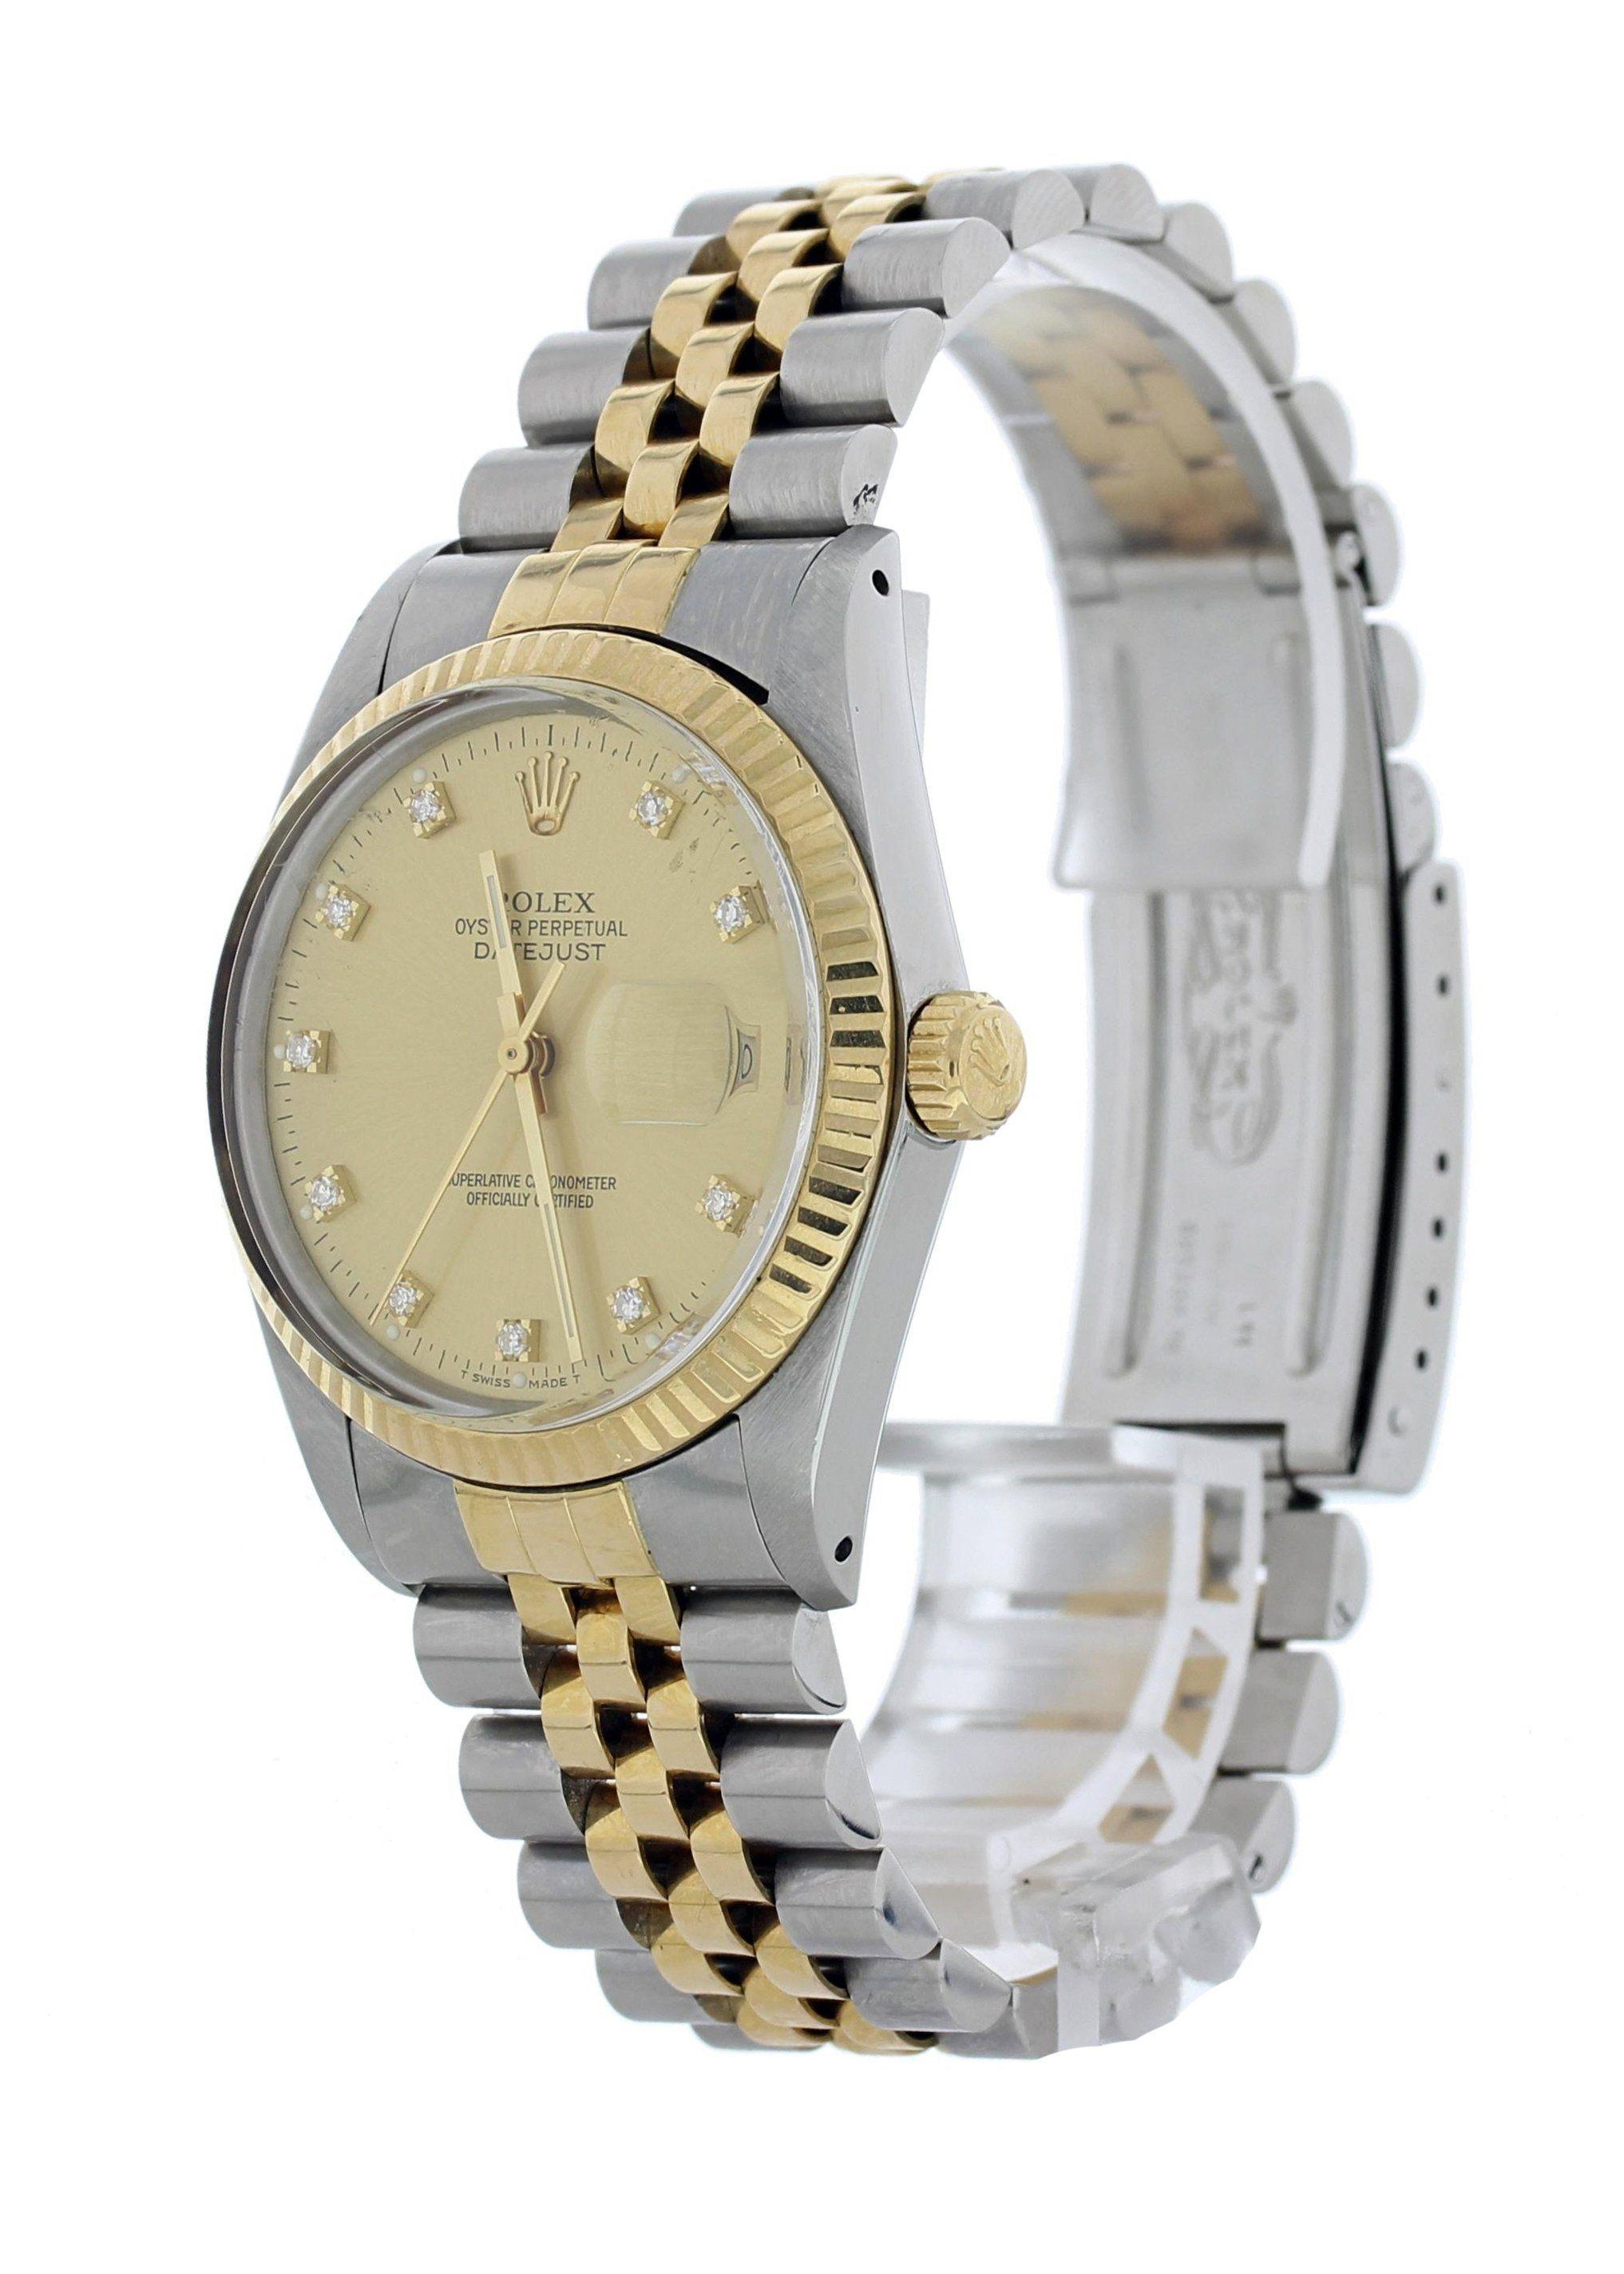 Rolex Datejust 16013 Diamond Dial Men's Watch In Excellent Condition For Sale In New York, NY